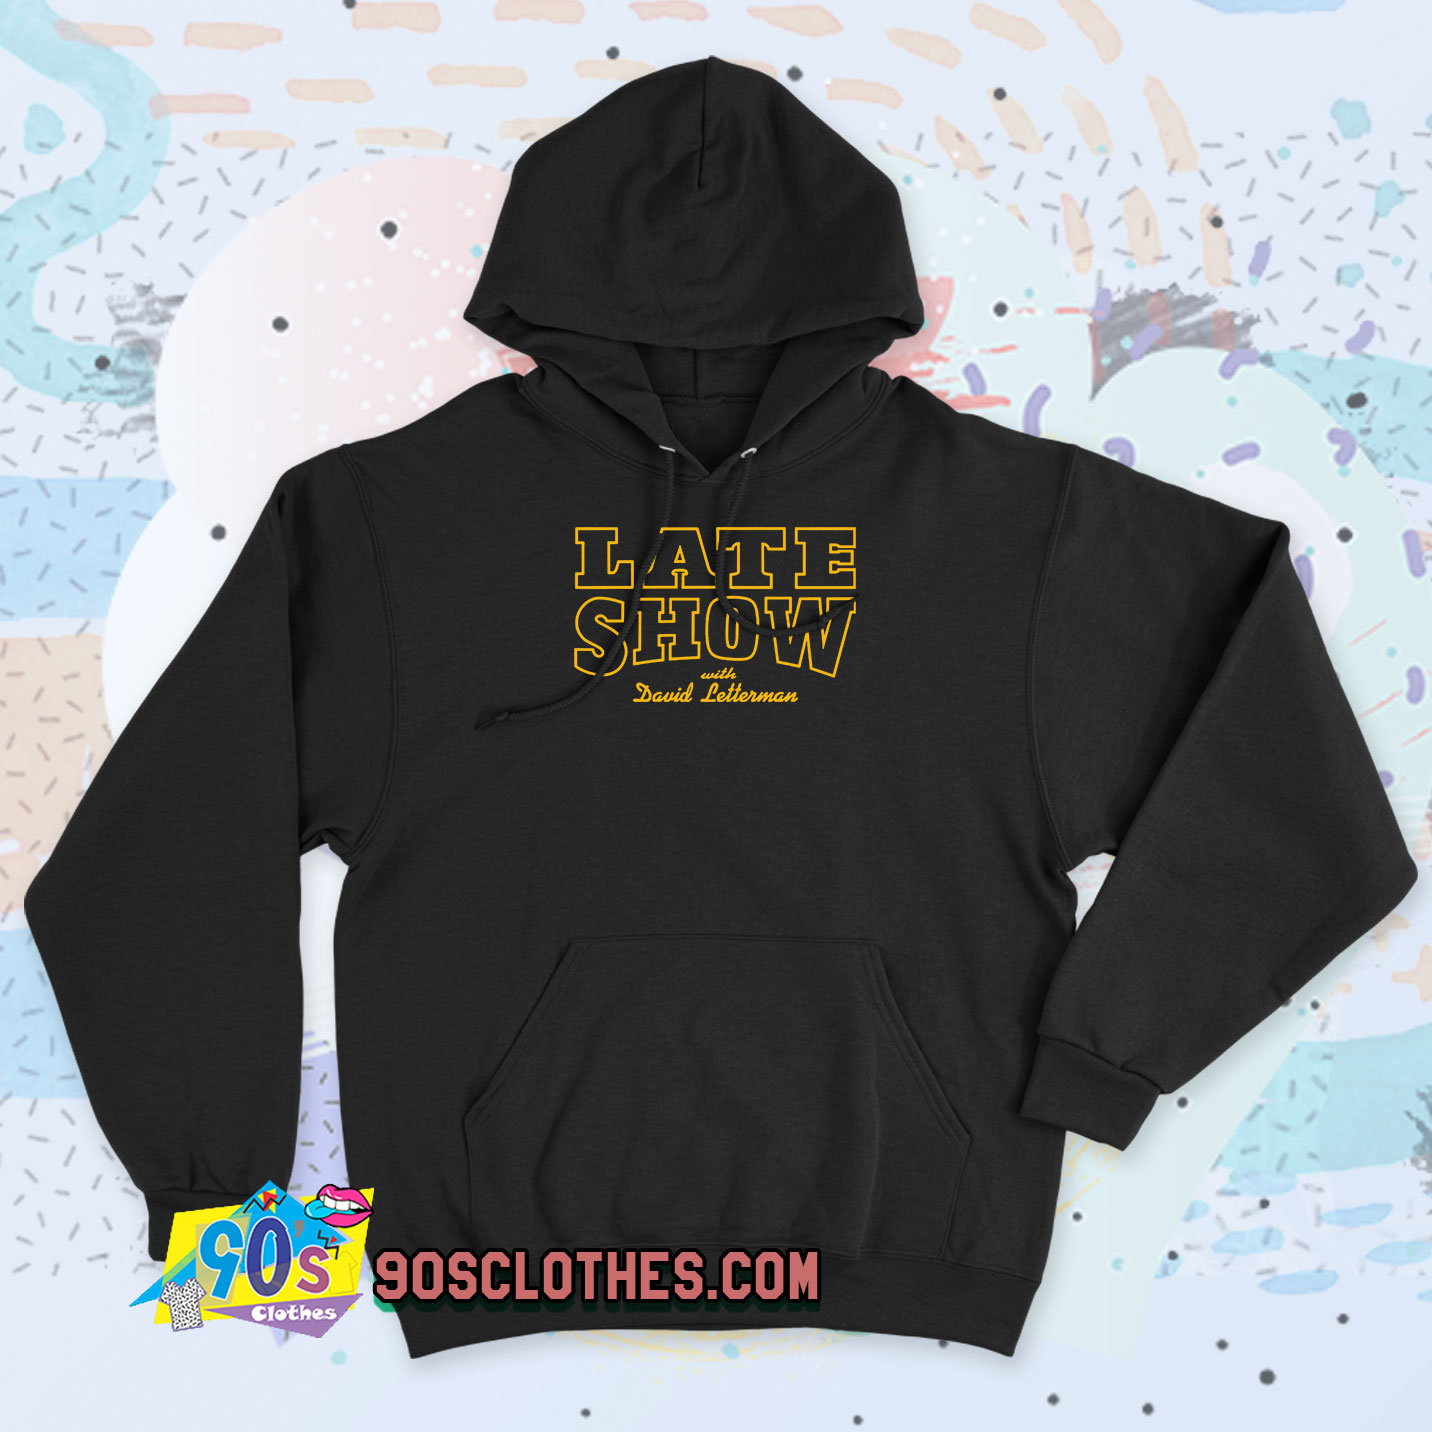 Late With Letterman Hoodie - 90sclothes.com